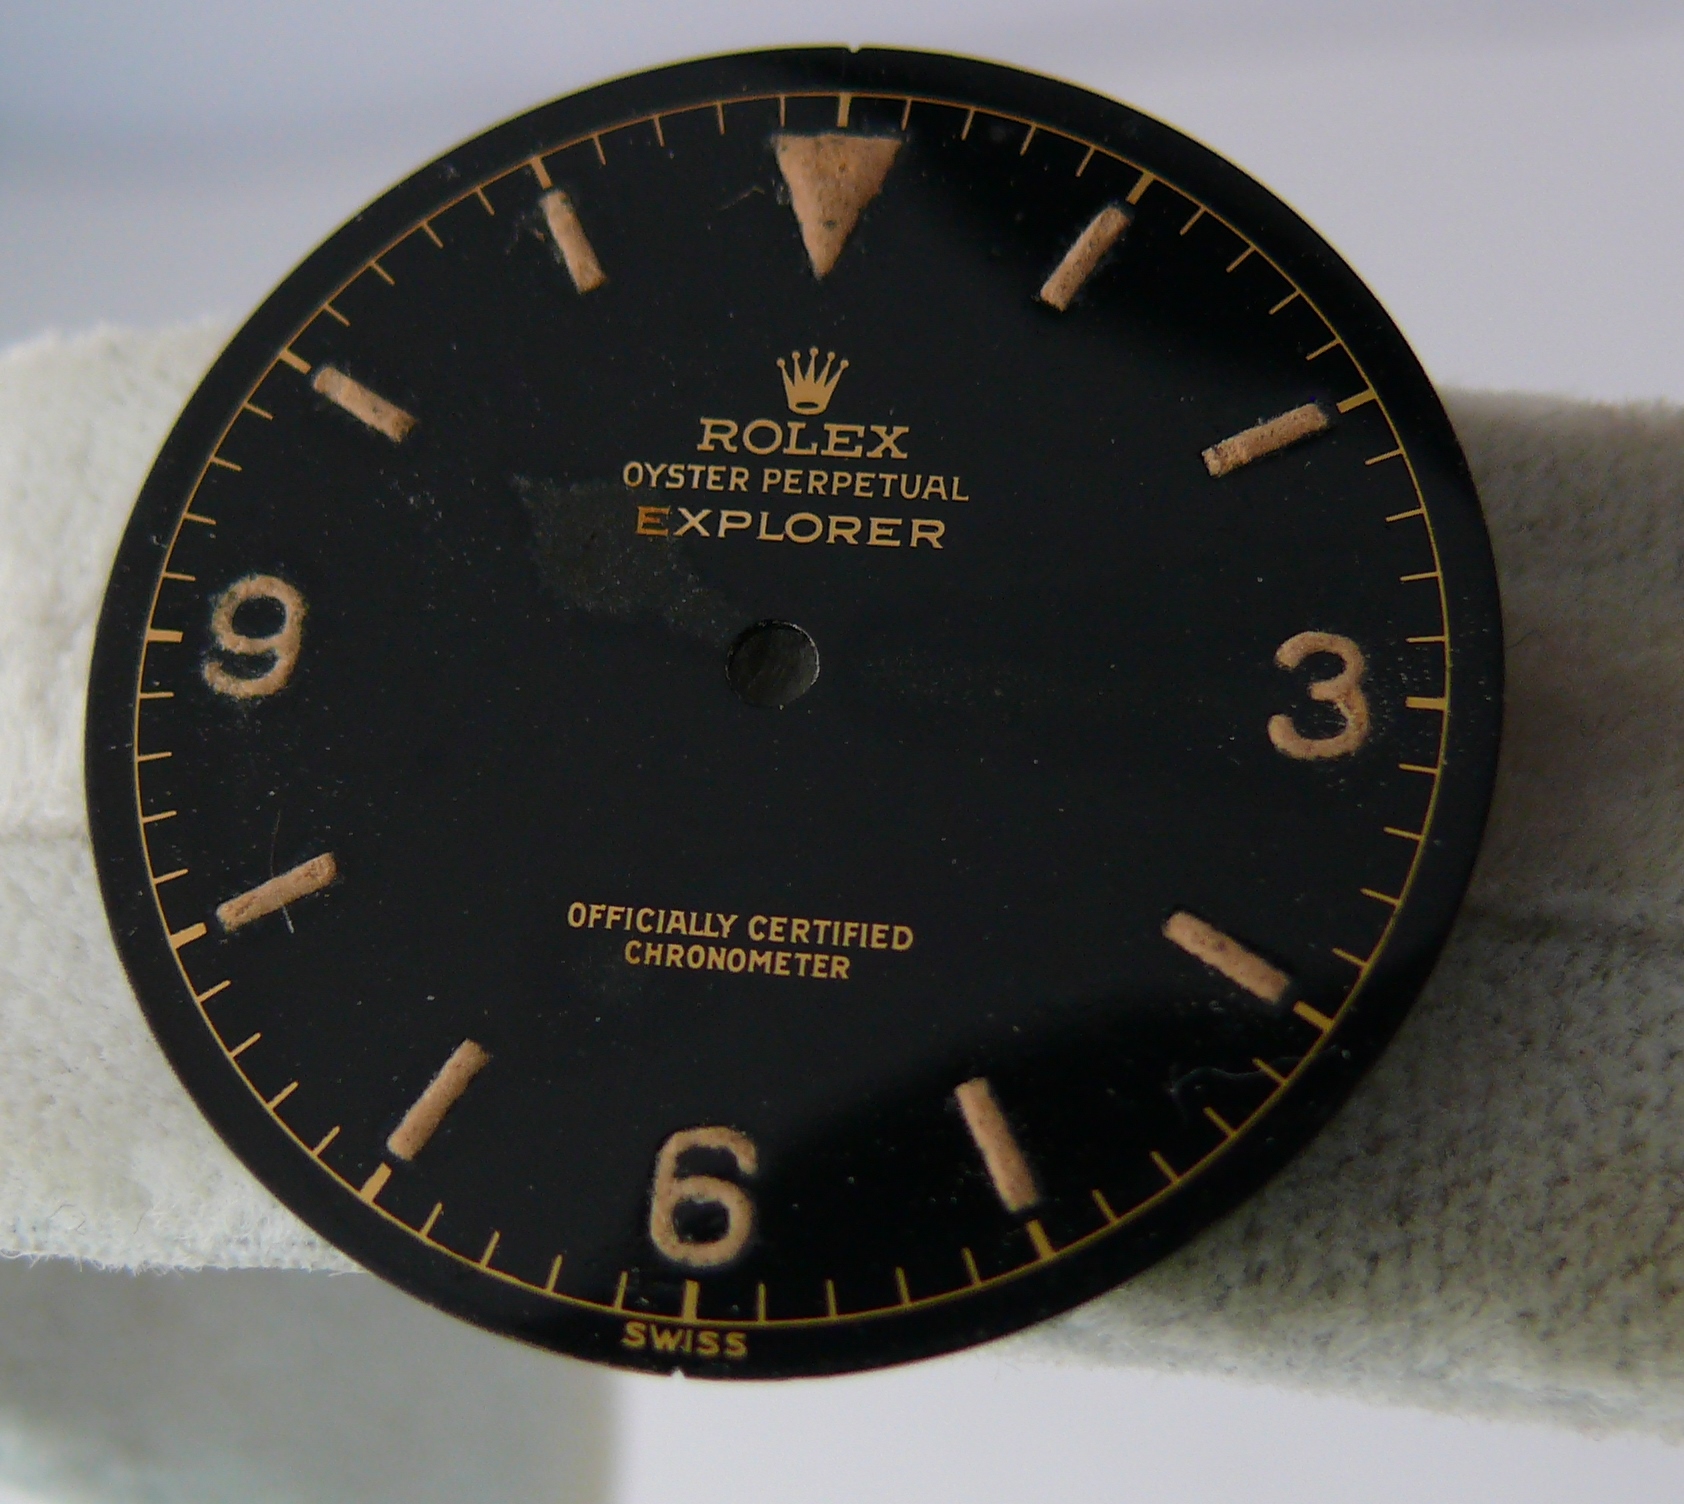 1950s Vintage Rolex Explorer 6610 Gilt Dial. Please note there are hands radium burns on the dial - Image 5 of 13